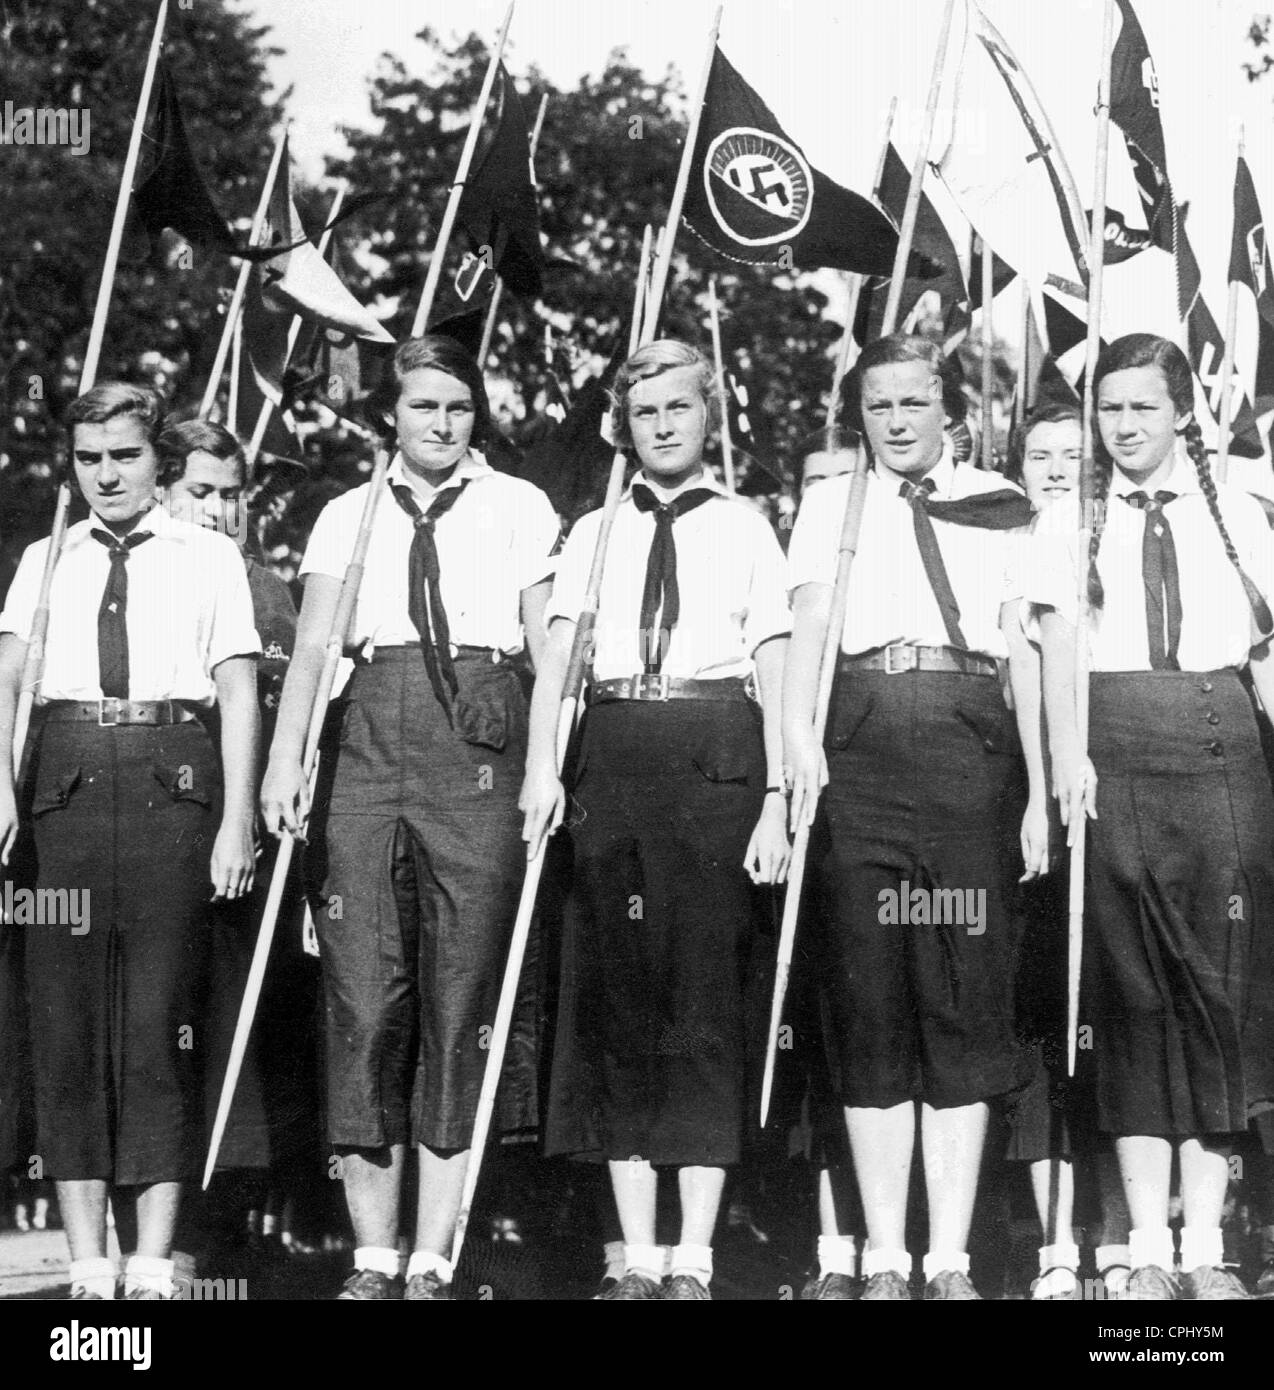 Young girls with flags, 1937 Stock Photo